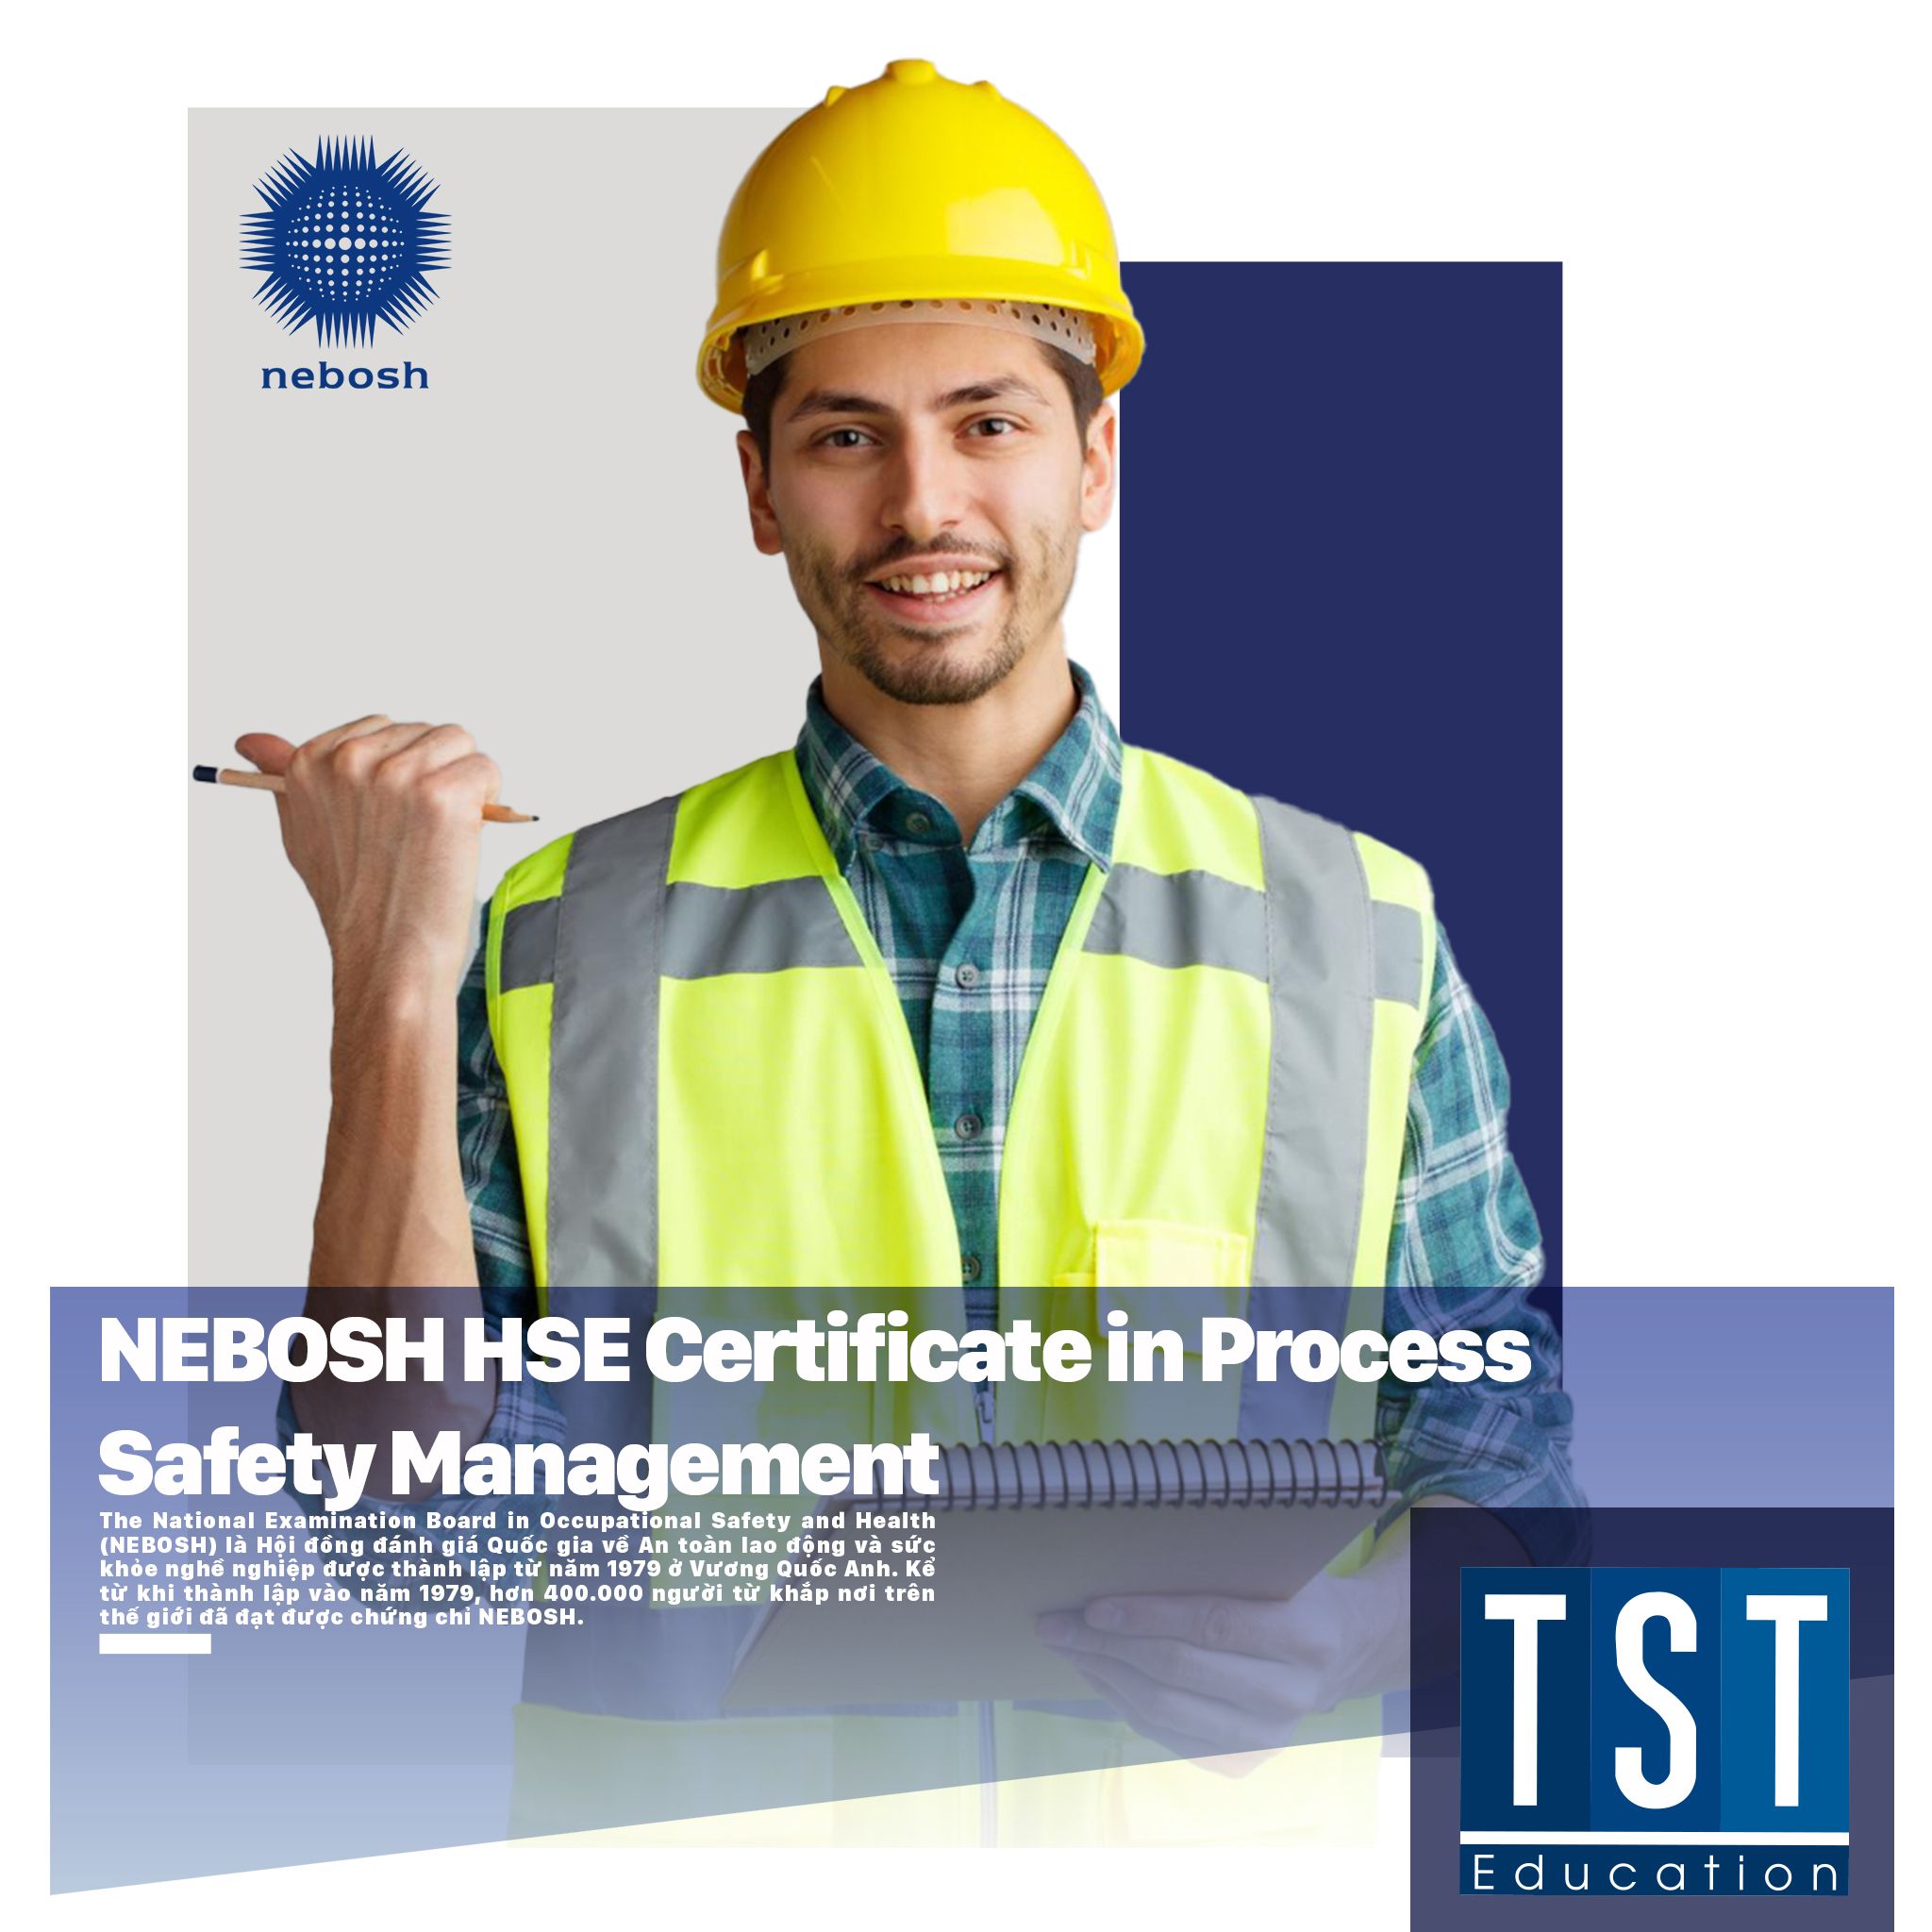  NEBOSH HSE Certificate in Process Safety Management 